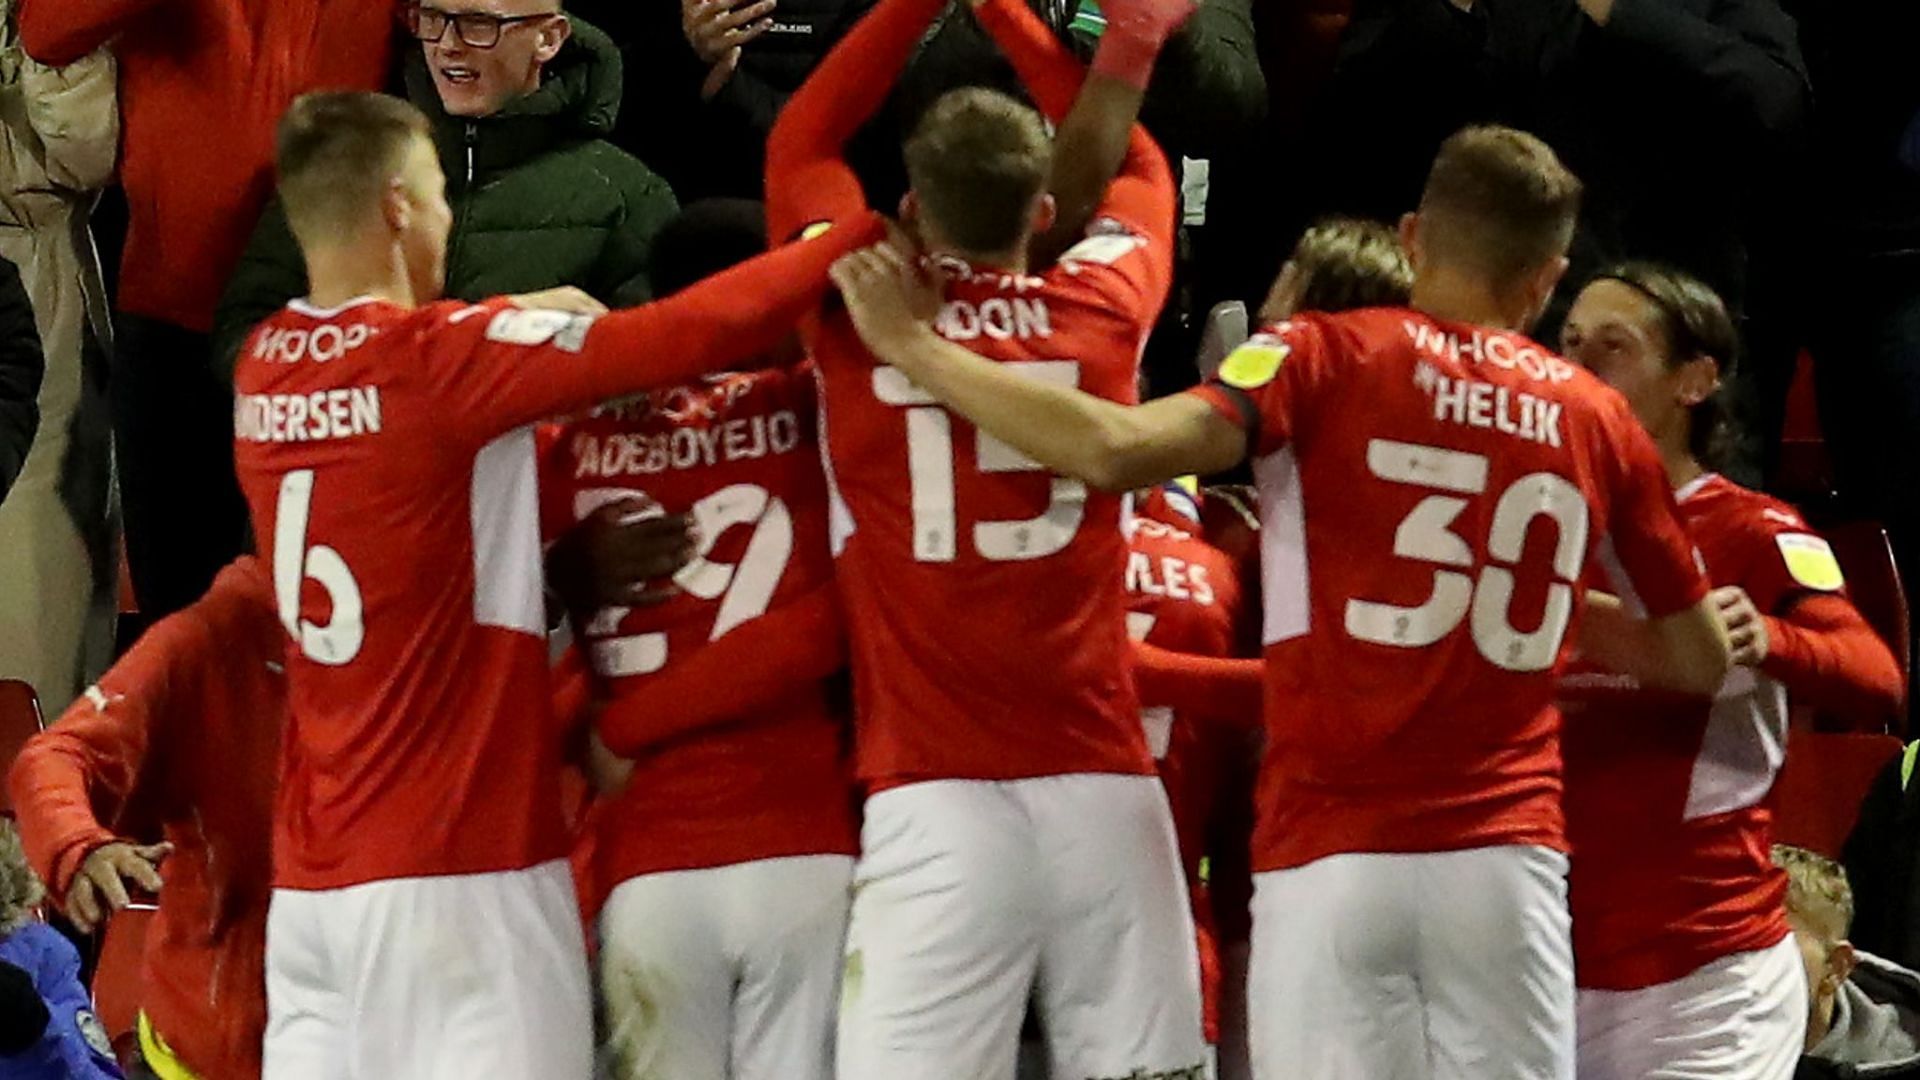 Barnsley and Hull are looking for only their third win of the season